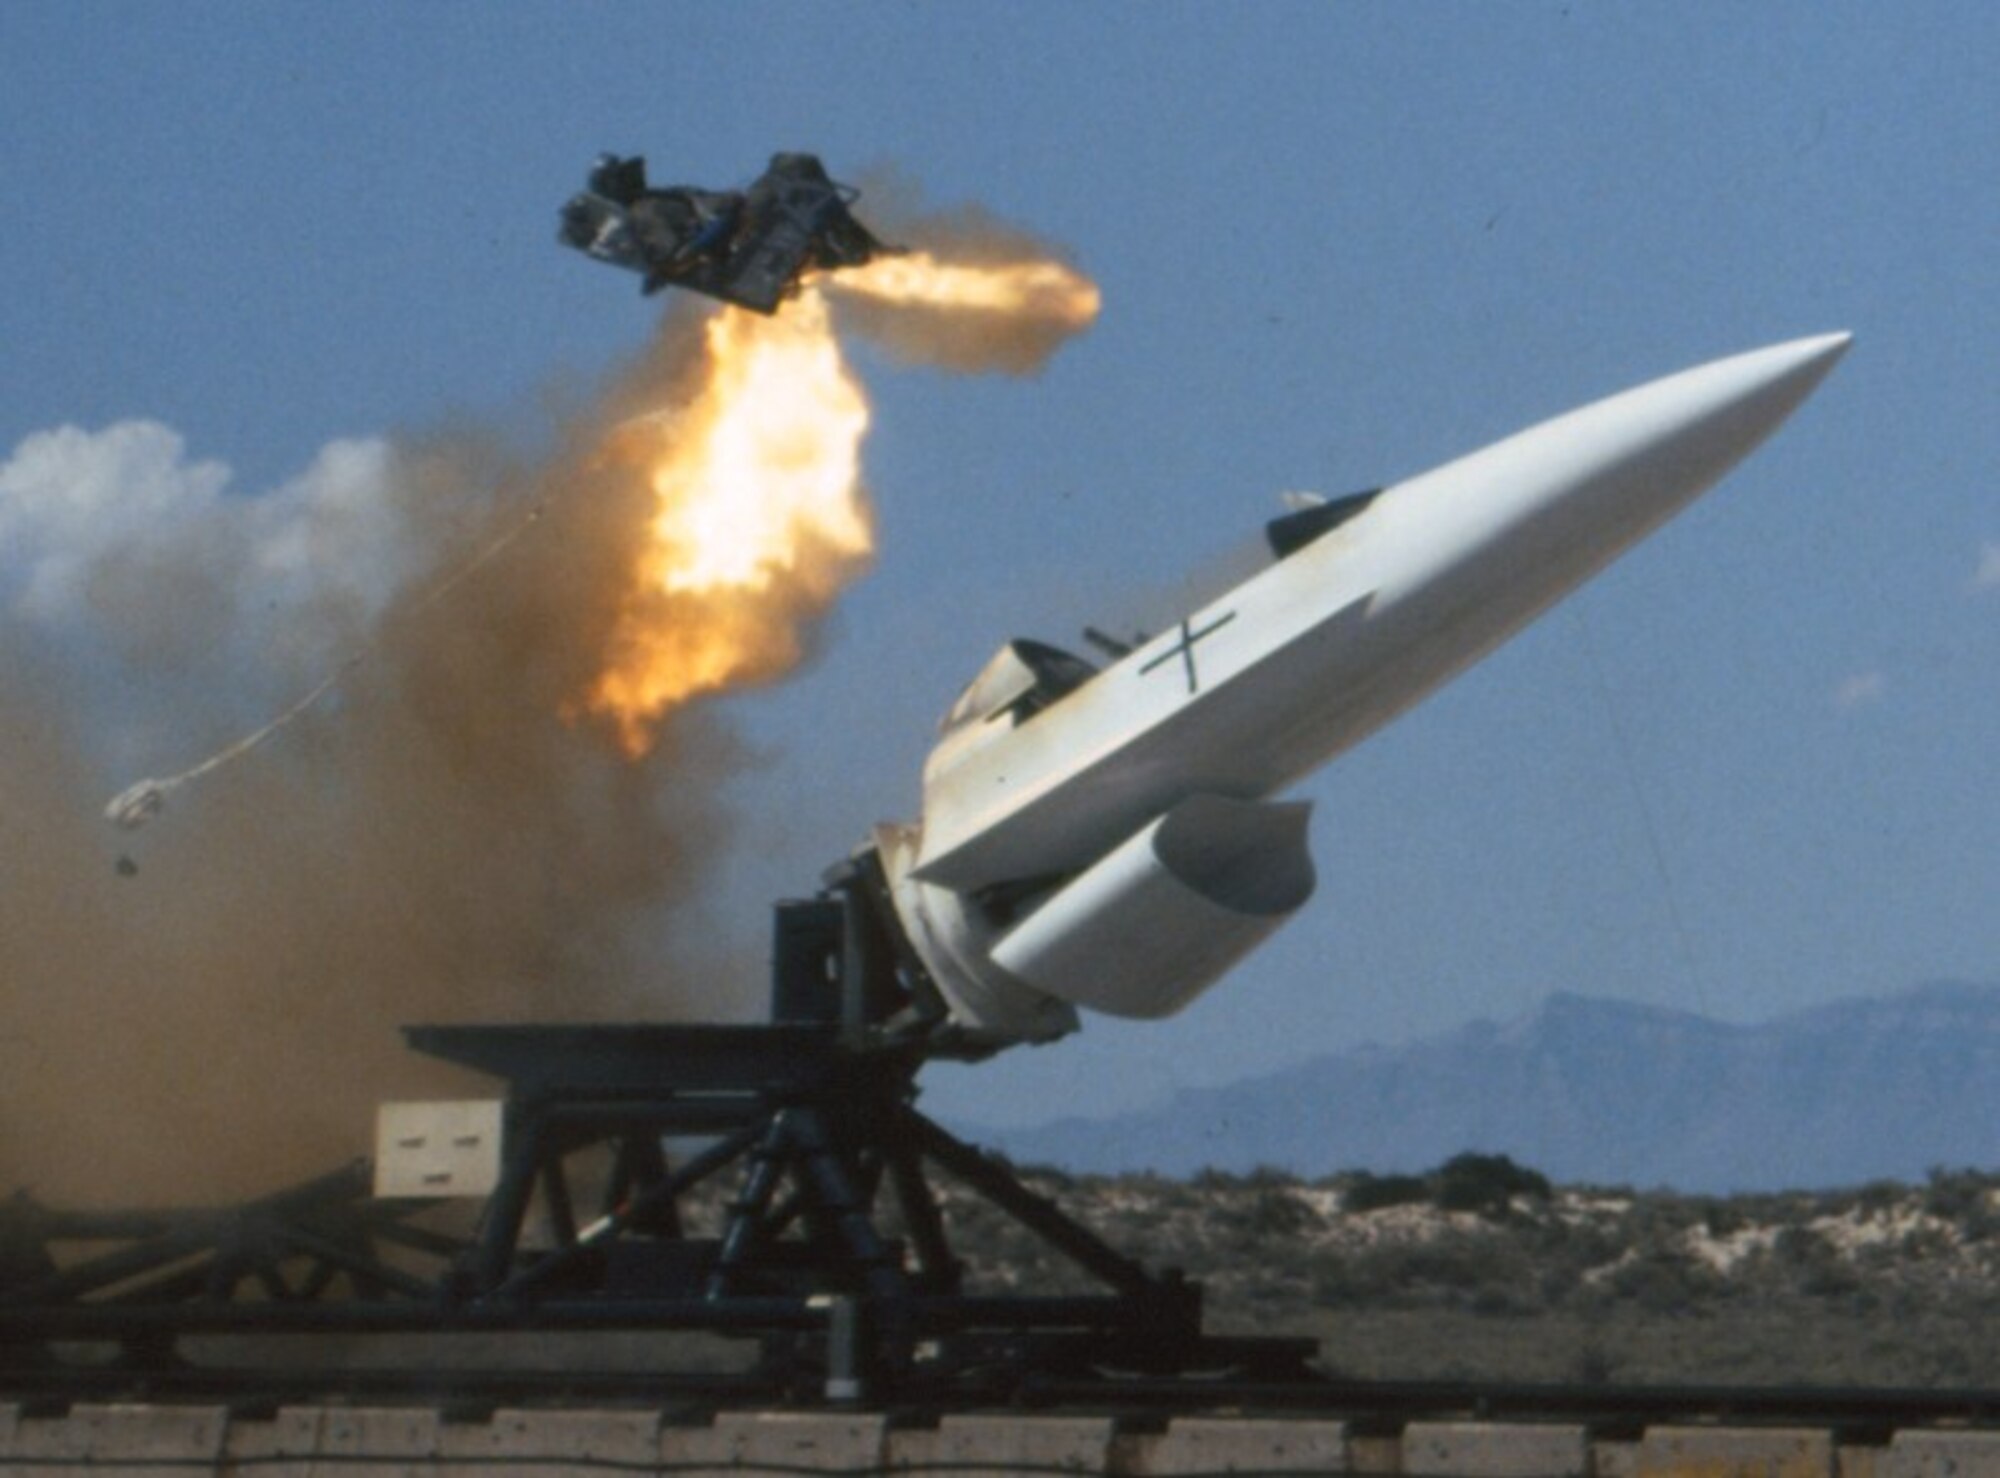 Holloman High Speed Test Track personnel conduct an ejection test at Holloman Air Force Base, New Mexico. Ejection testing is among the wide of array of testing at the HHSTT, which is operated by the 846th Test Squadron, a unit of the 704th Test Group of the Arnold Engineering Development Complex, headquartered at Arnold Air Force Base, Tenn. Personnel in the 846 TS are currently exploring the modernization of the test track, now in its eighth decade of existence, to extend its lifespan and further aid in the development of hypersonic systems. (U.S. Air Force photo)